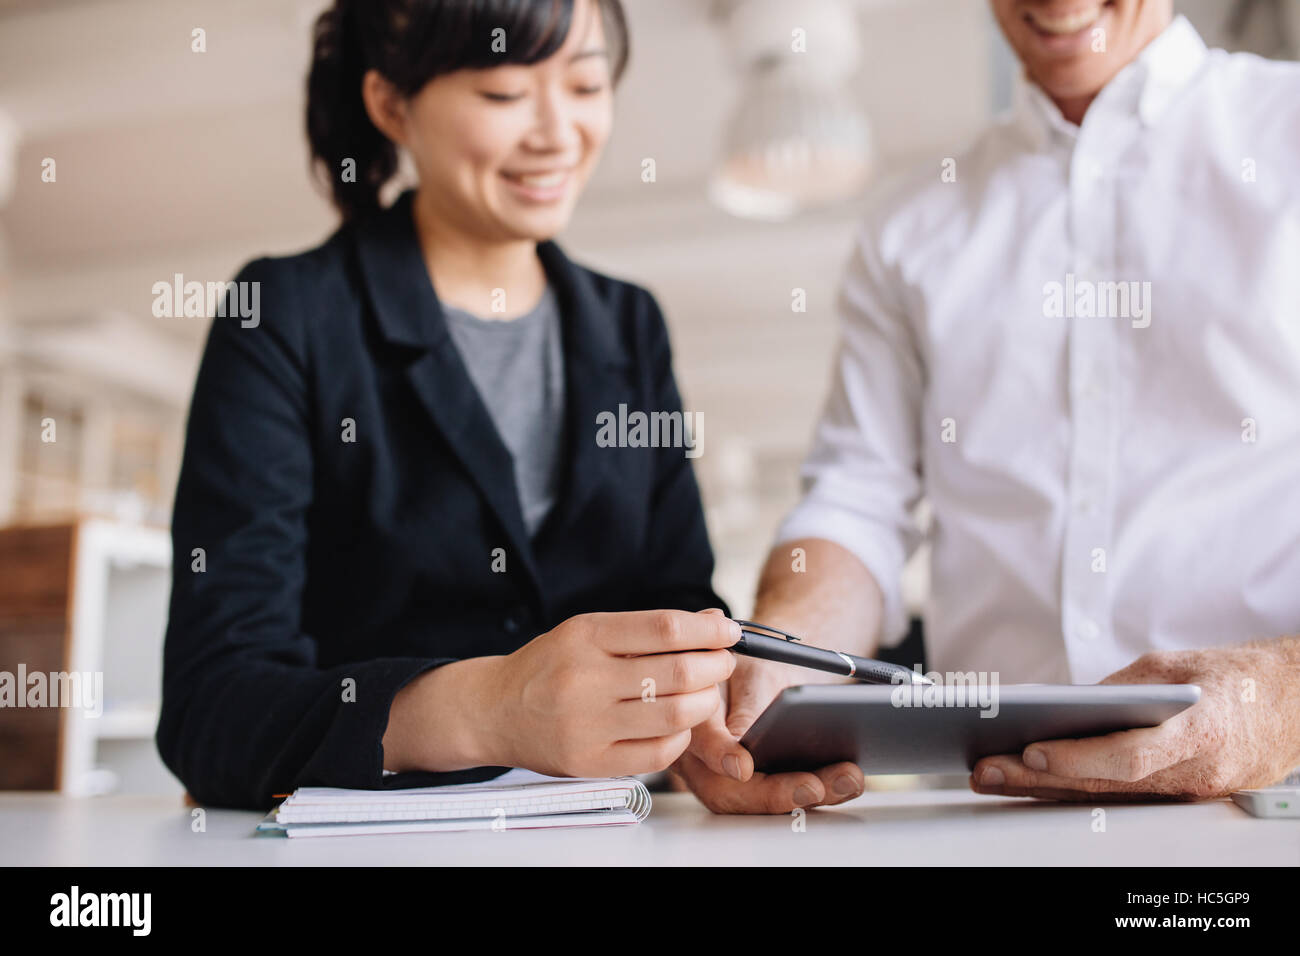 Two young business people working together, with female executive pointing digital tablet. Businessman and businesswoman using touchscreen computer in Stock Photo